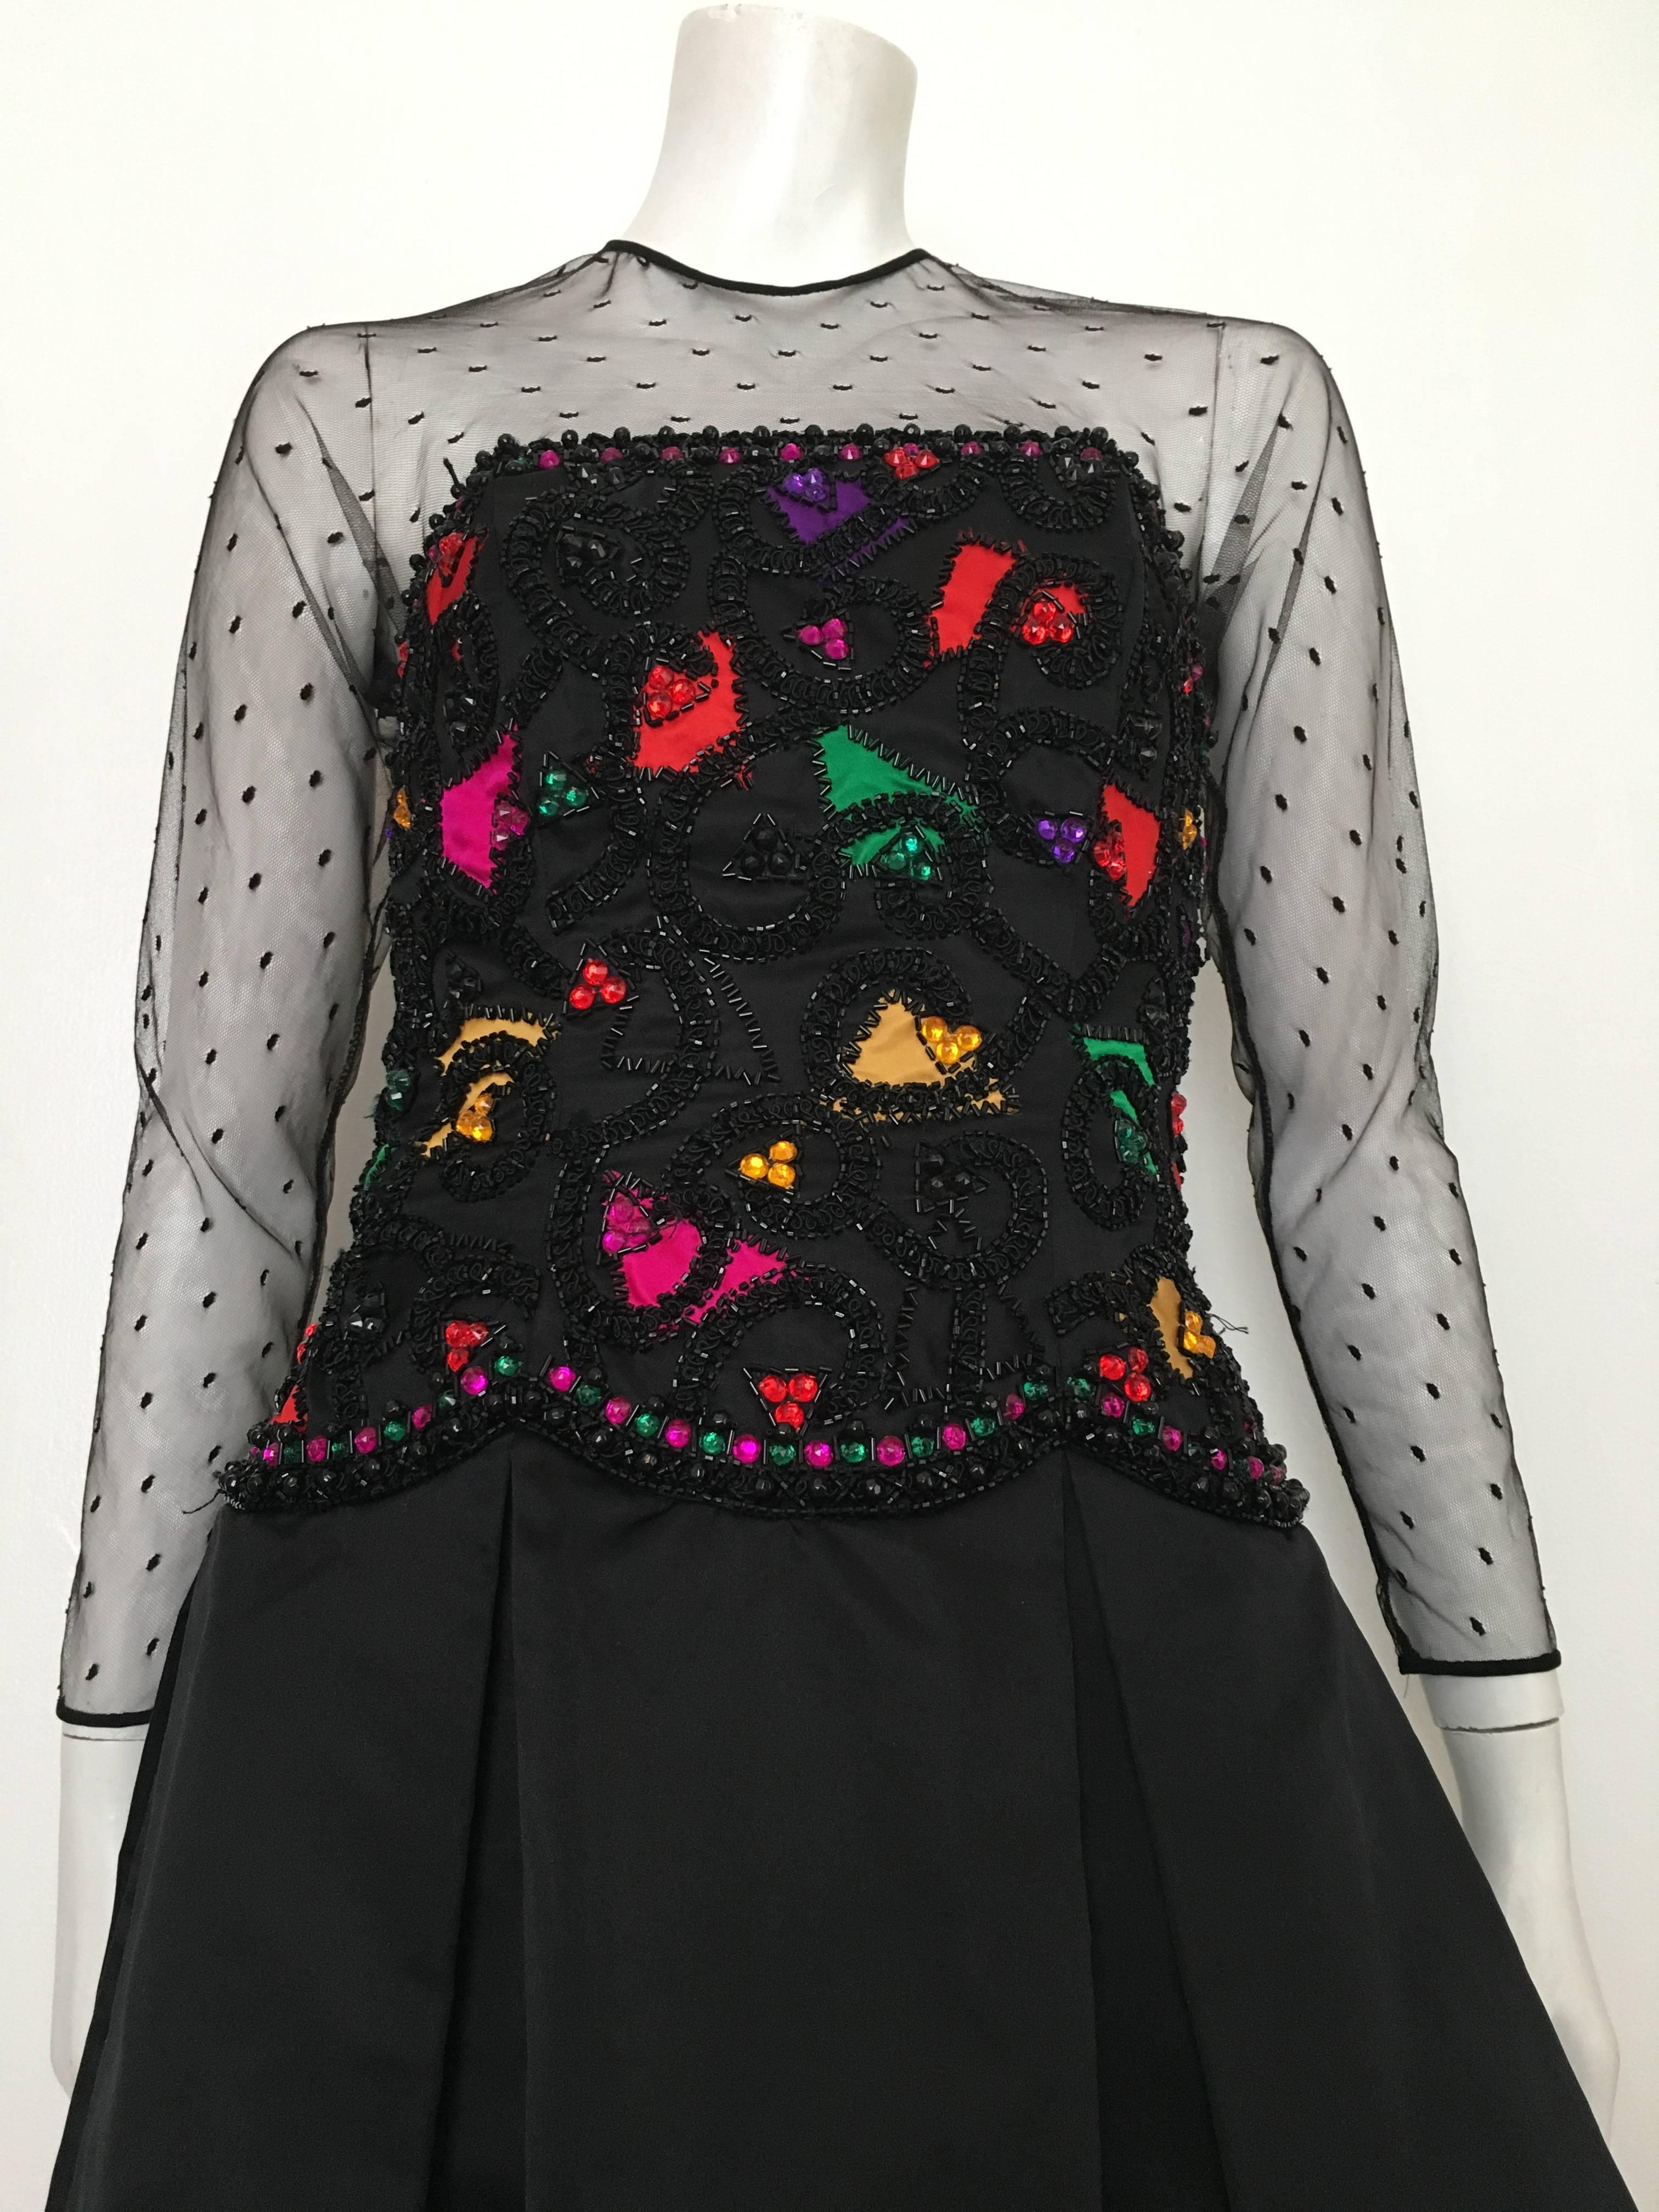 Victoria Royal 1980s black beads & rhinestone bodice with netting collar & sleeves is a size 6.  Ladies please grab your trusted tape measure so you can properly measure your bust, waist & hips to make certain this absolutely stunning dress will fit